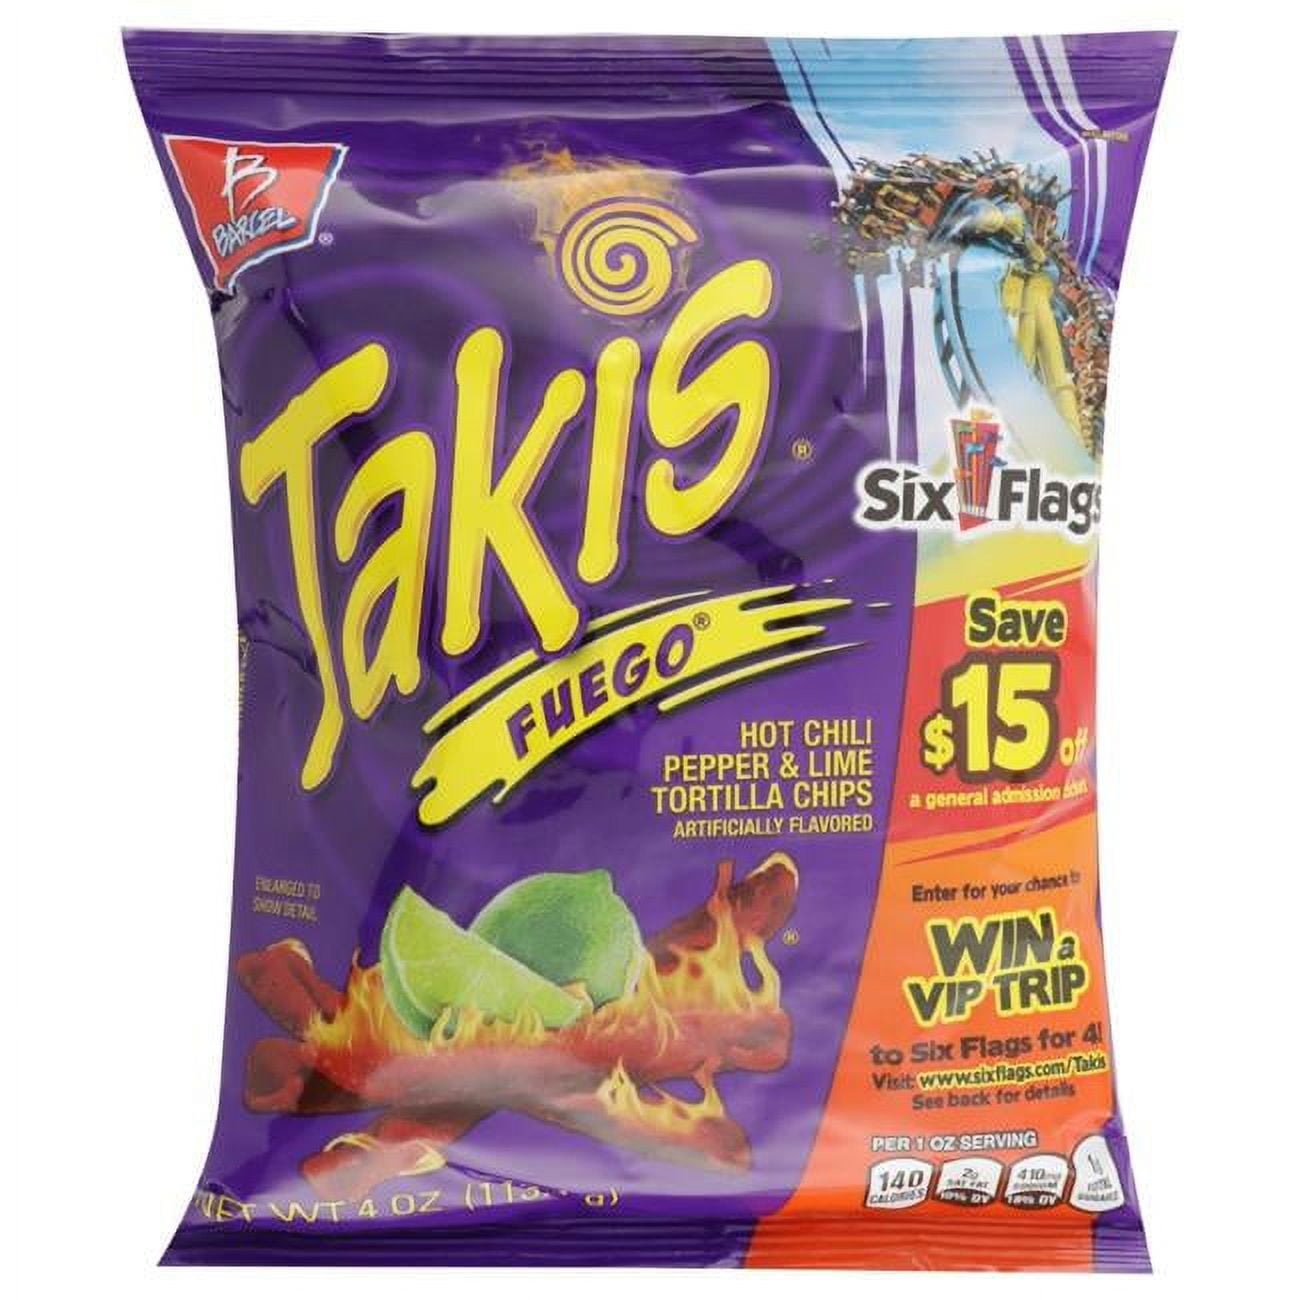 Takis Tortilla Chips, Hot Chili Pepper & Lime, Extreme 4 oz, Tortilla